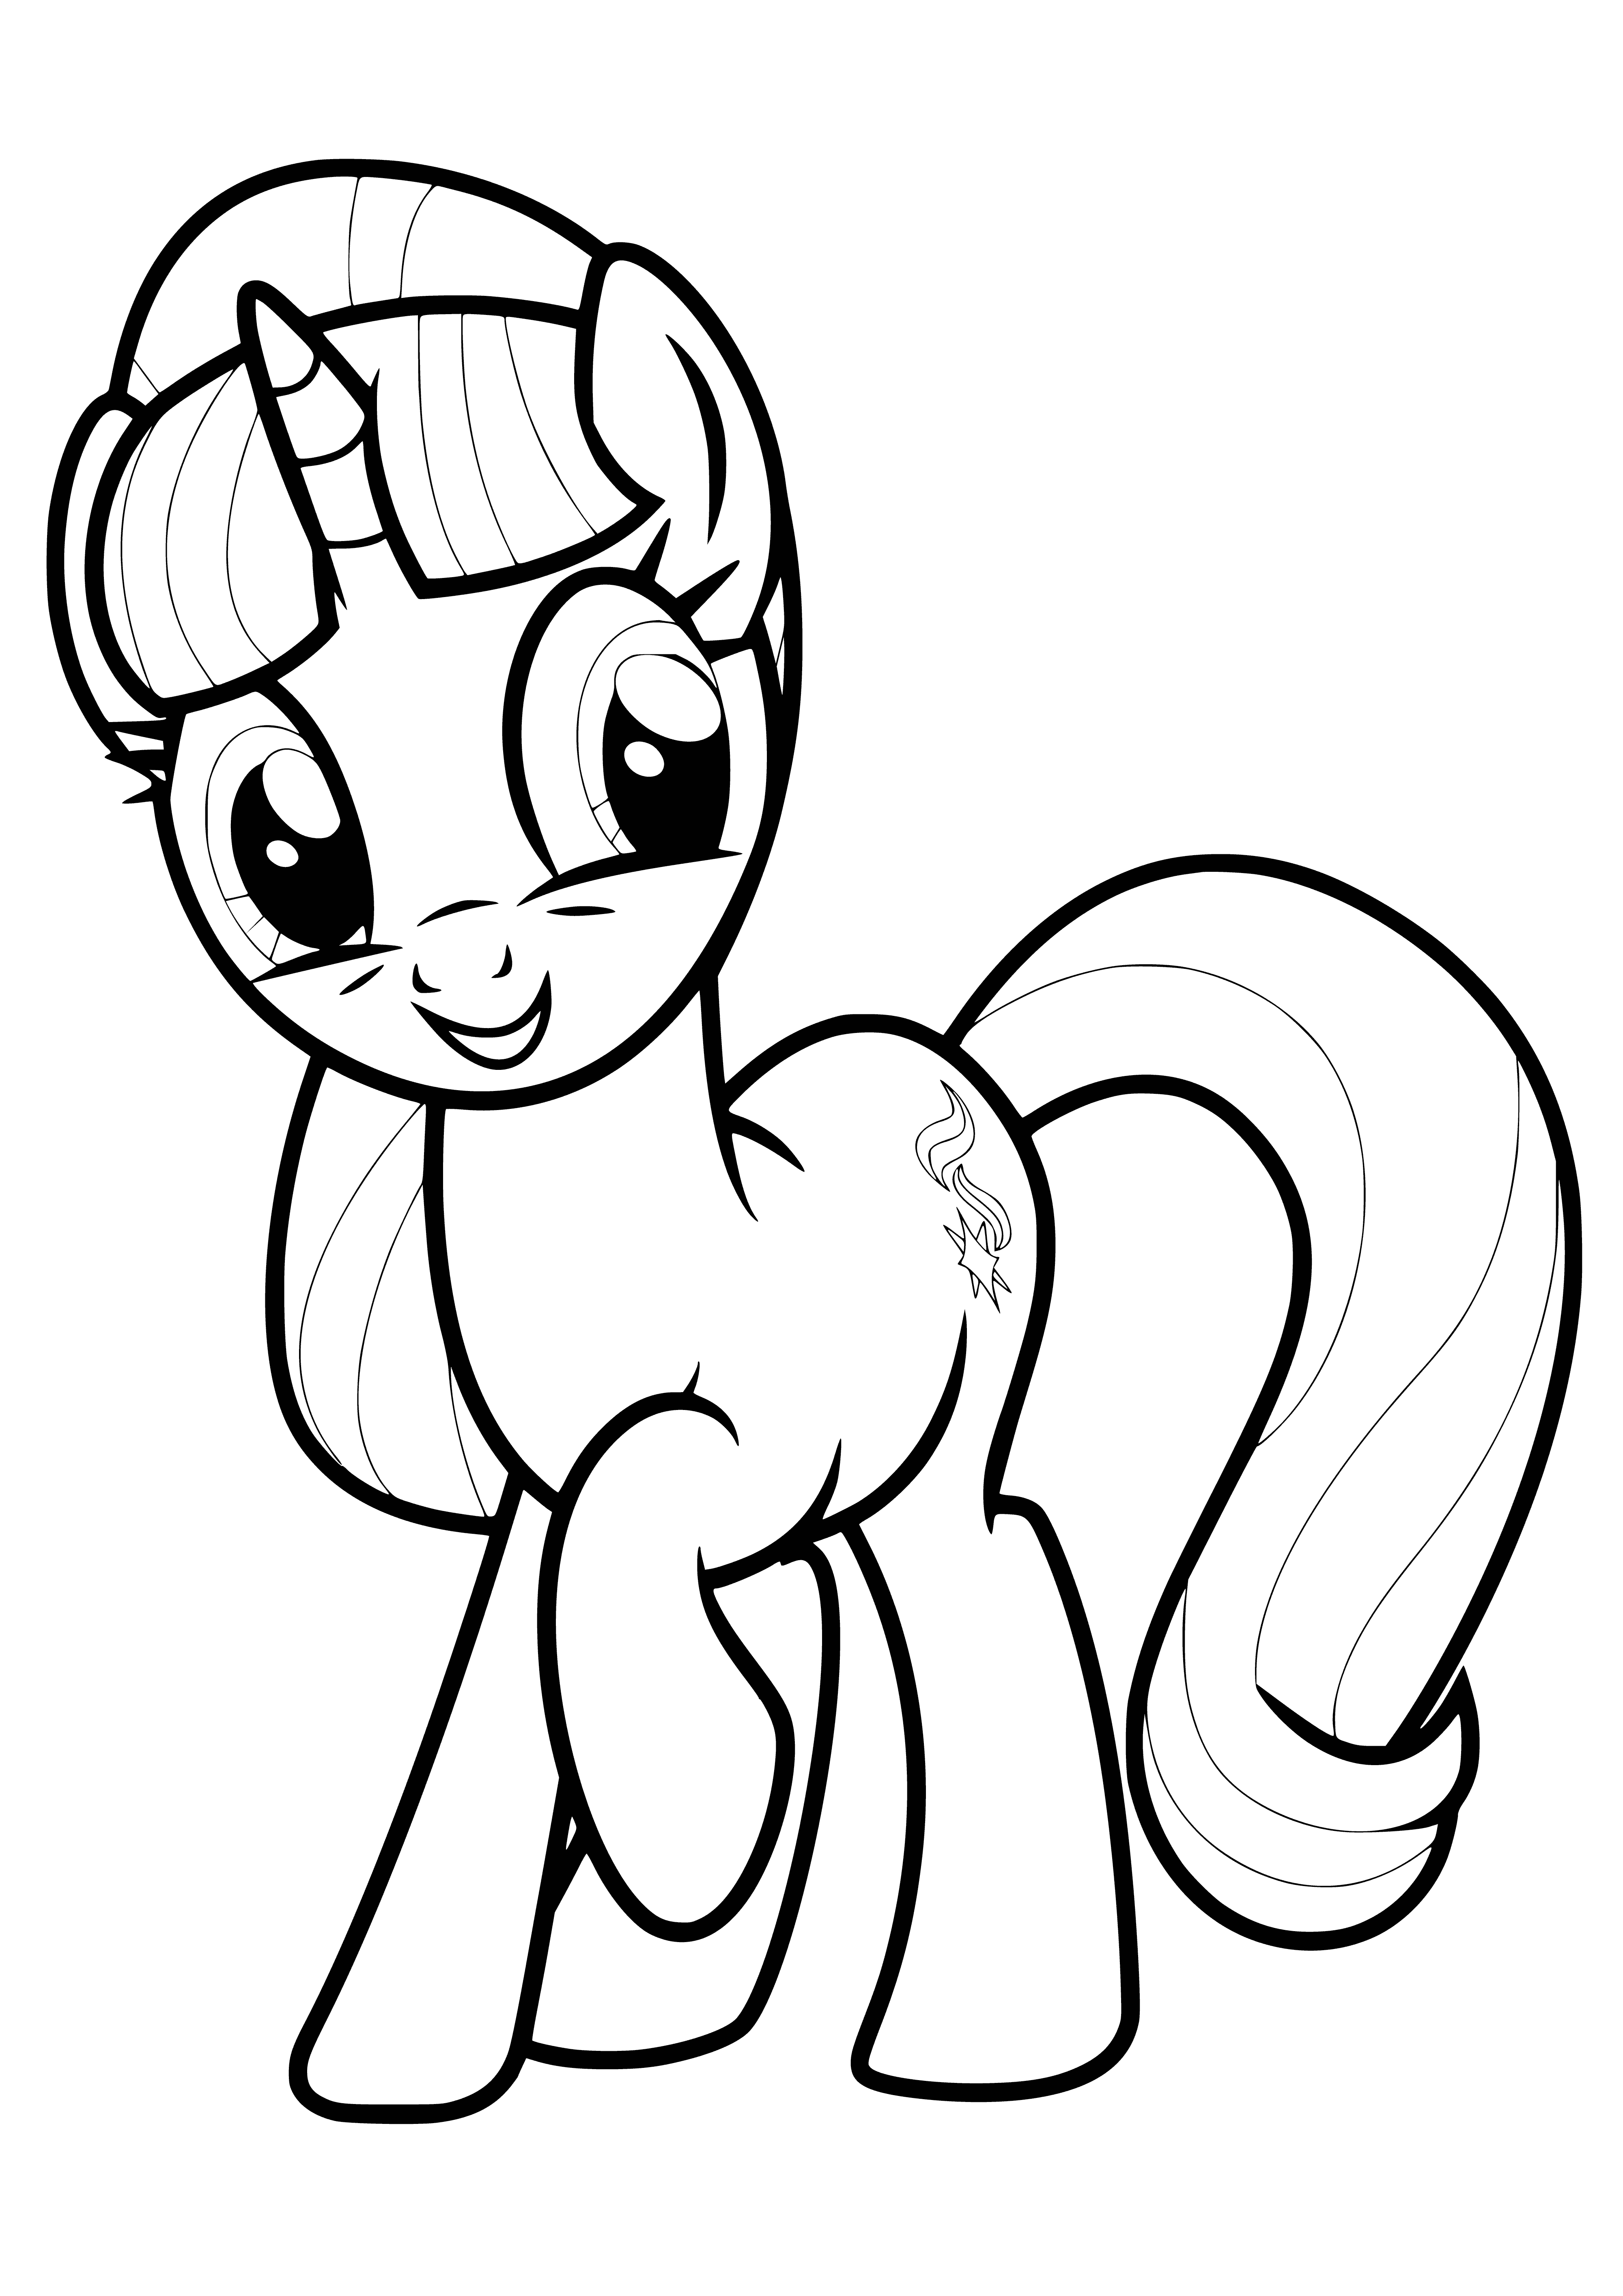 Purple pony with star-shaped cutie mark stands in front of a glowing star. #PonyColoringPage